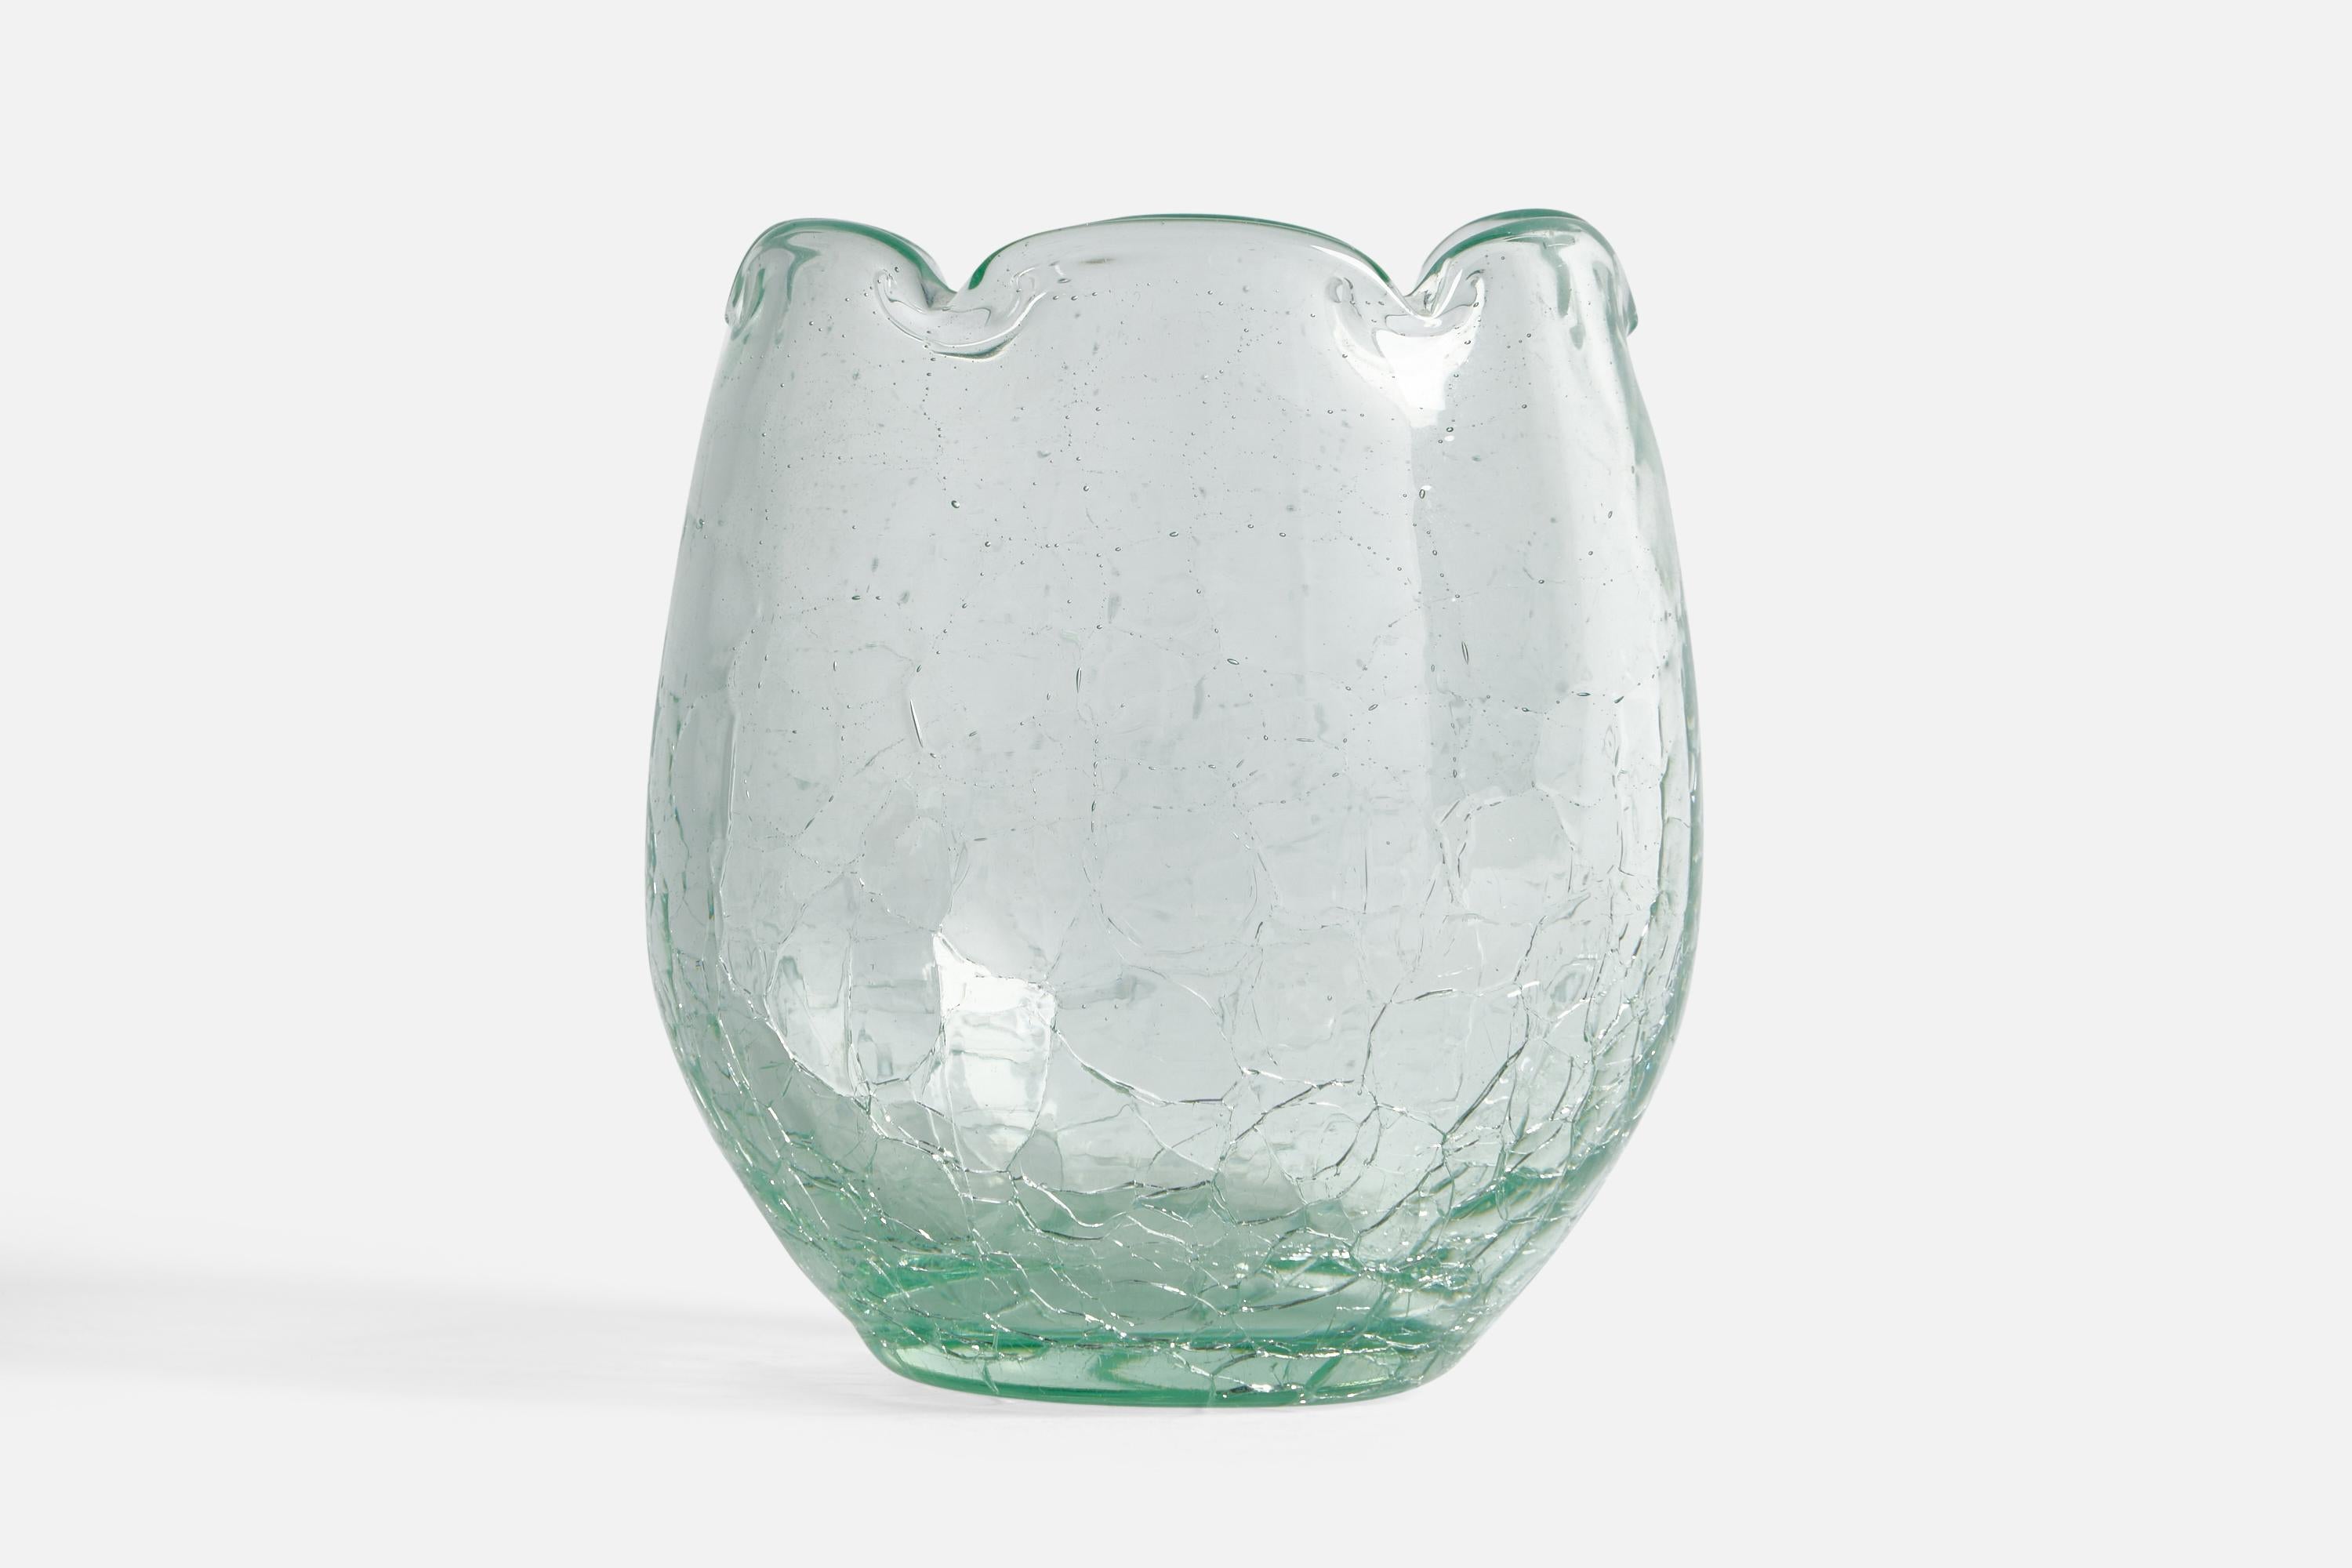 Mid-20th Century Ture Berglund, Vase, Glass, Sweden, 1940s For Sale